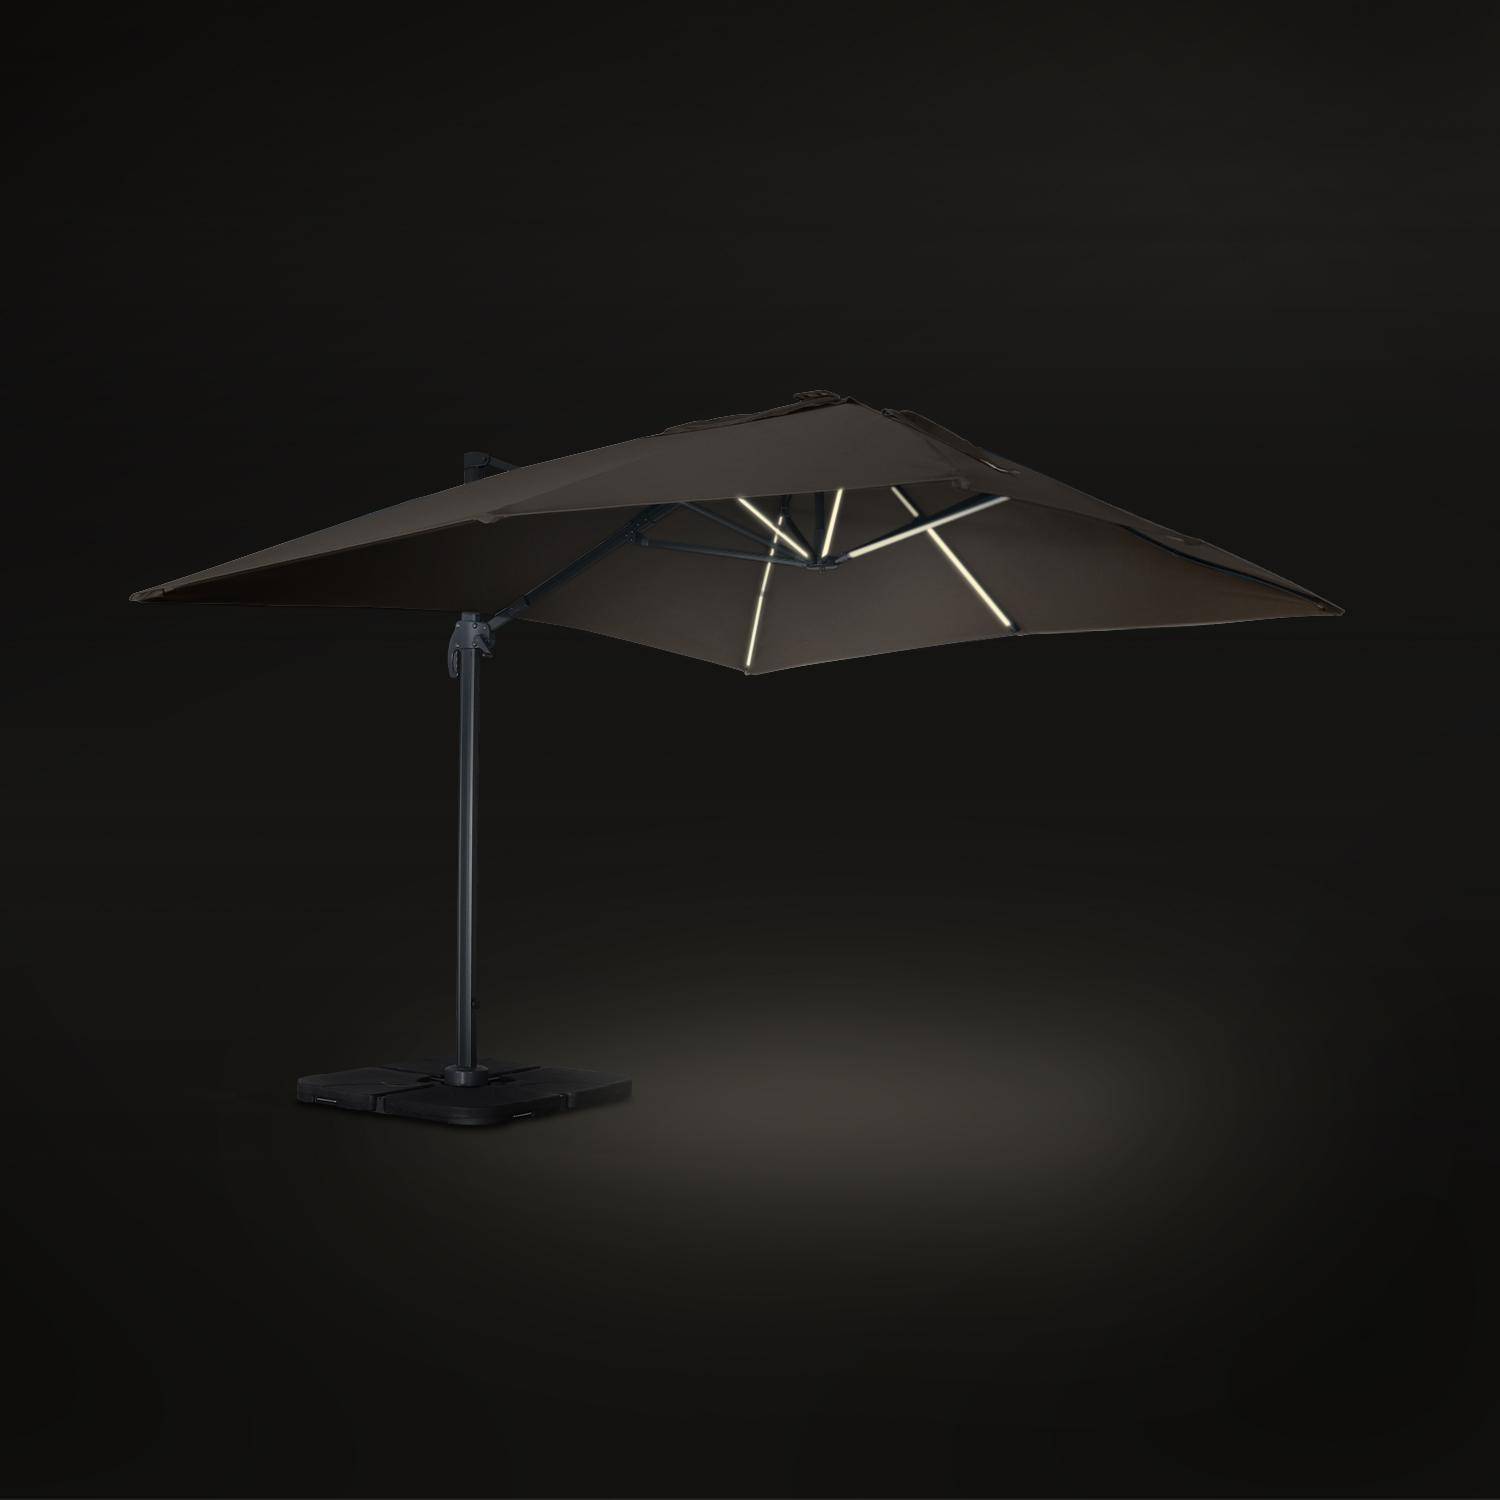 Premium quality rectangular 3x4m cantilever parasol with solar-powered integrated LED lights, tiltable, foldable , 360° rotation, cover included, beige,sweeek,Photo4